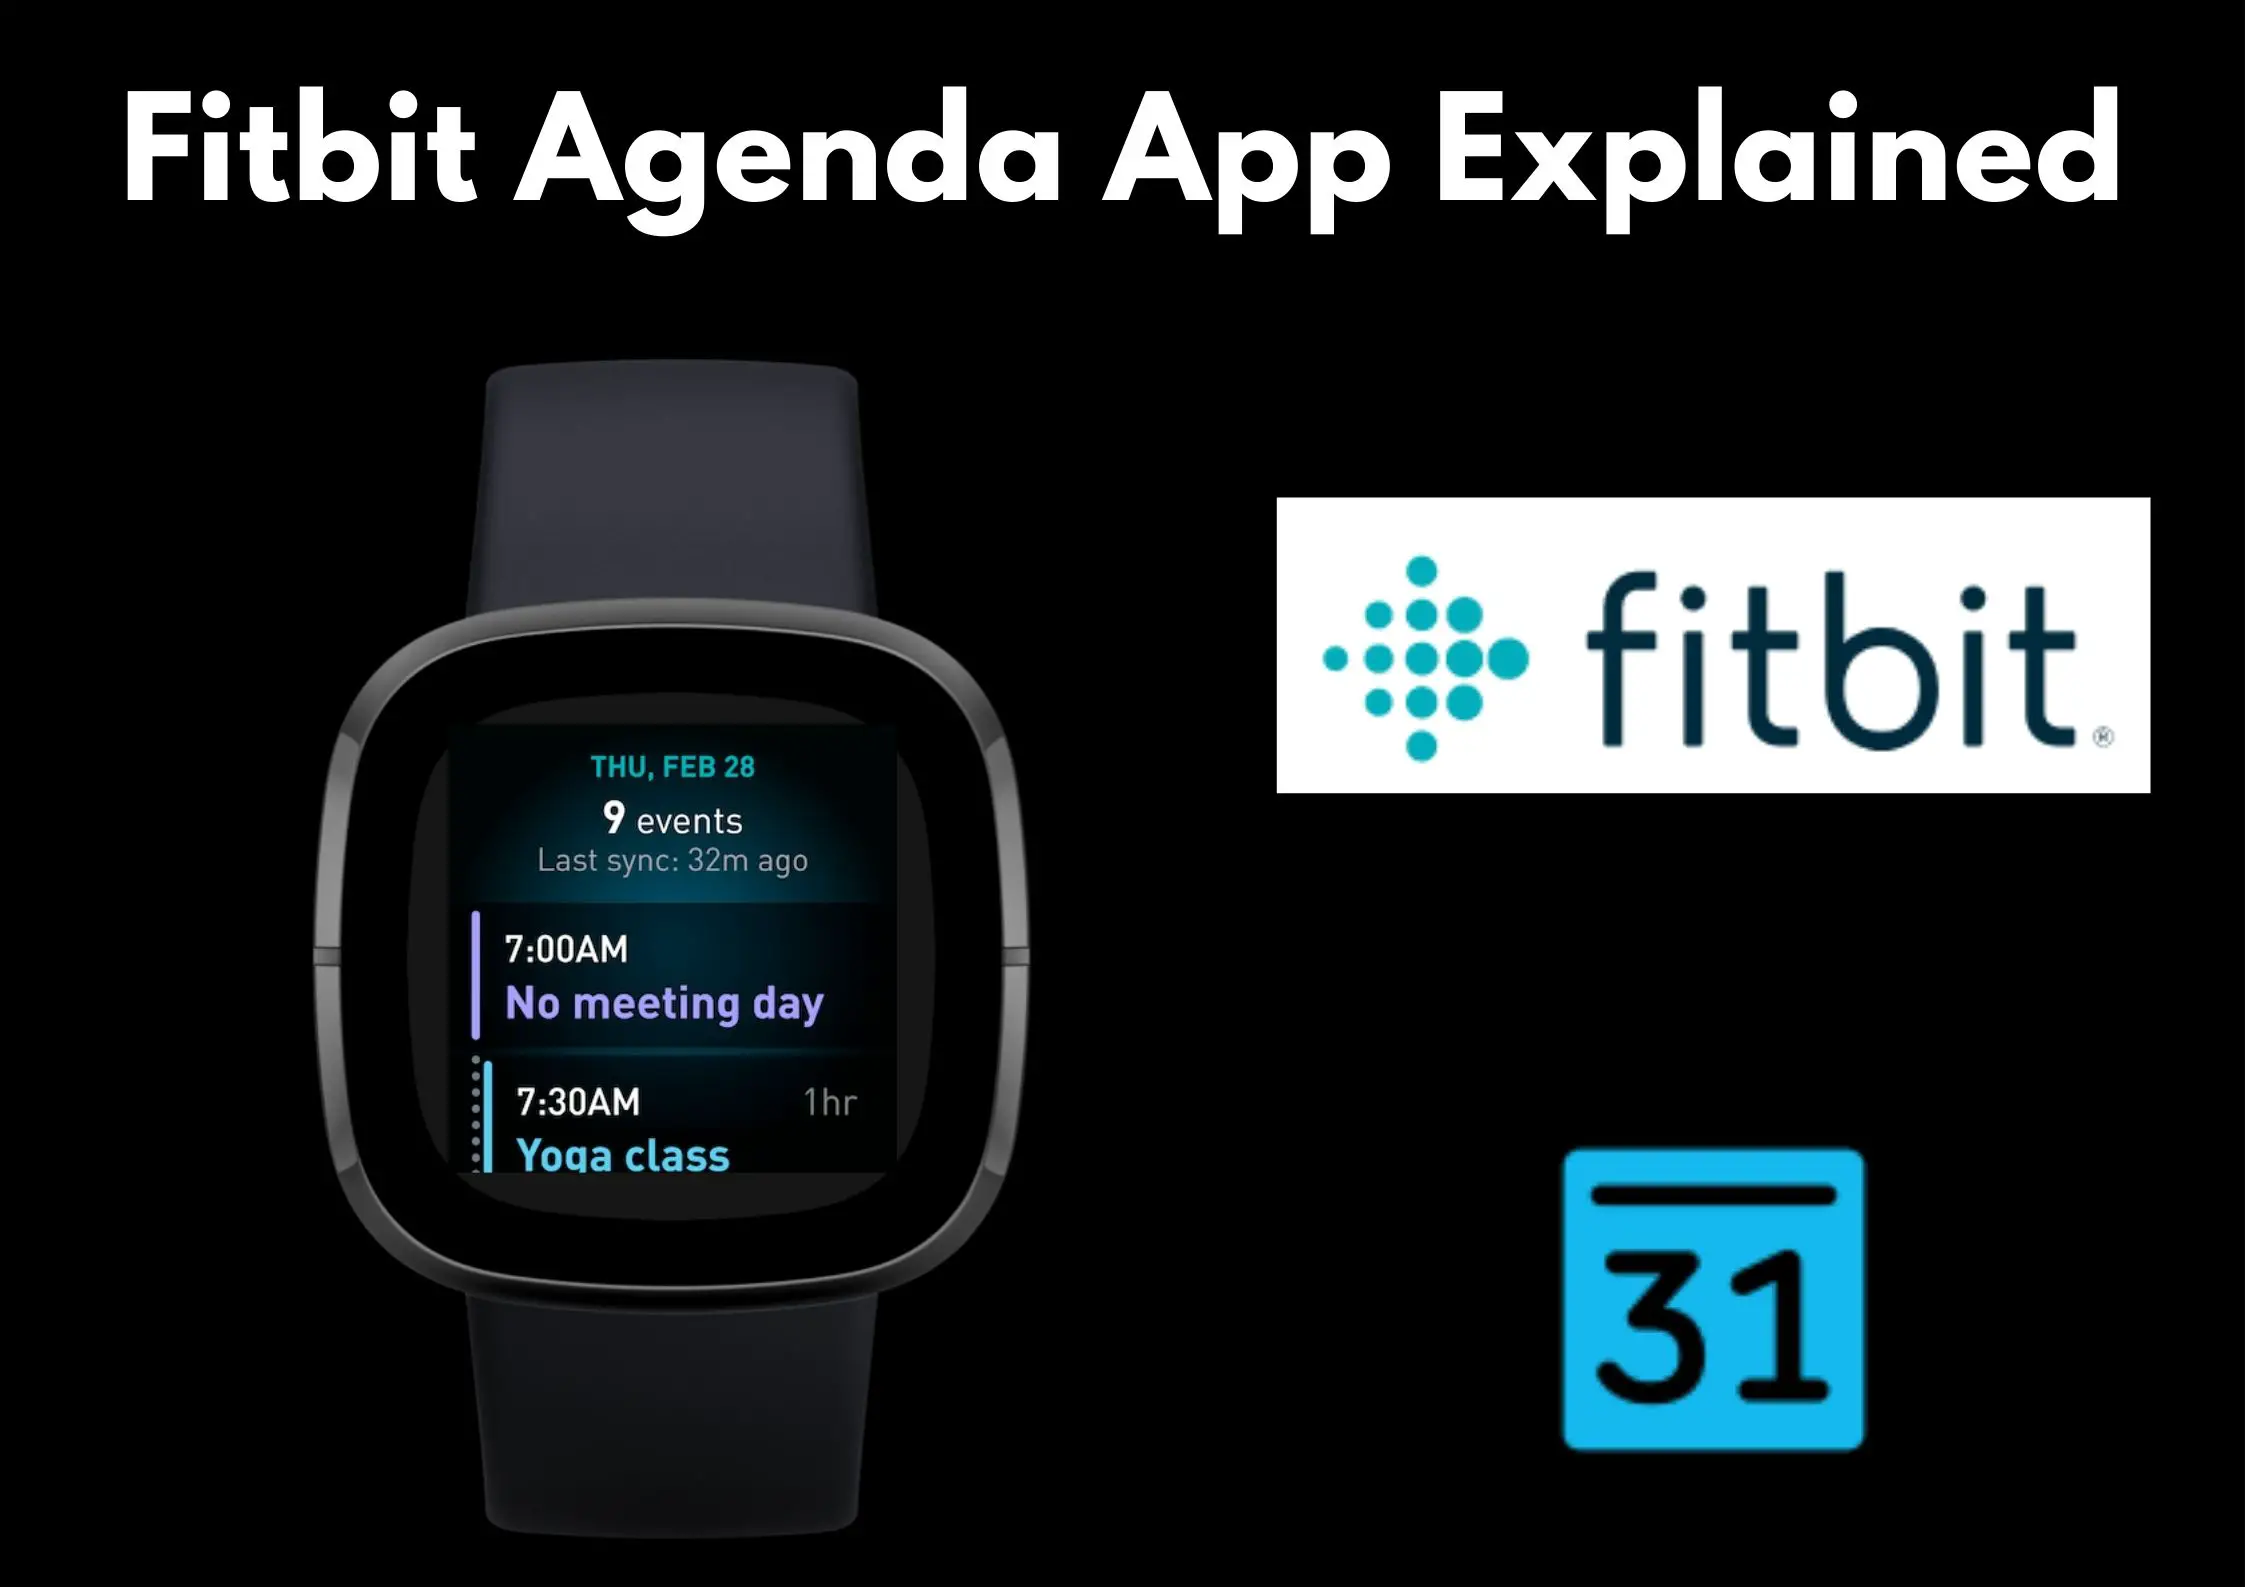 Fitbit Agenda App Explained: All You Need to Know